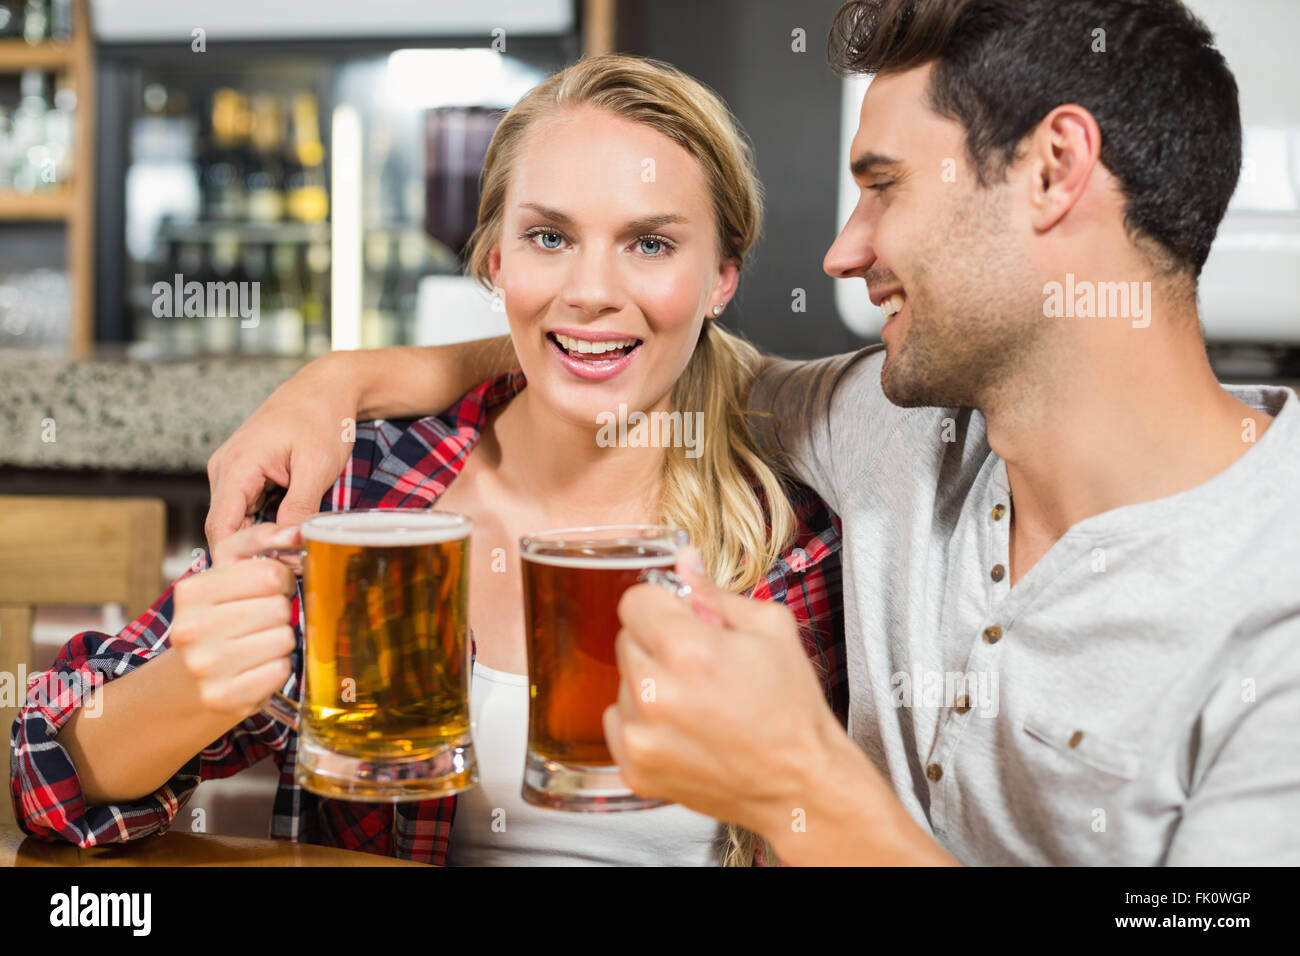 Couple toasting with beers Stock Photo